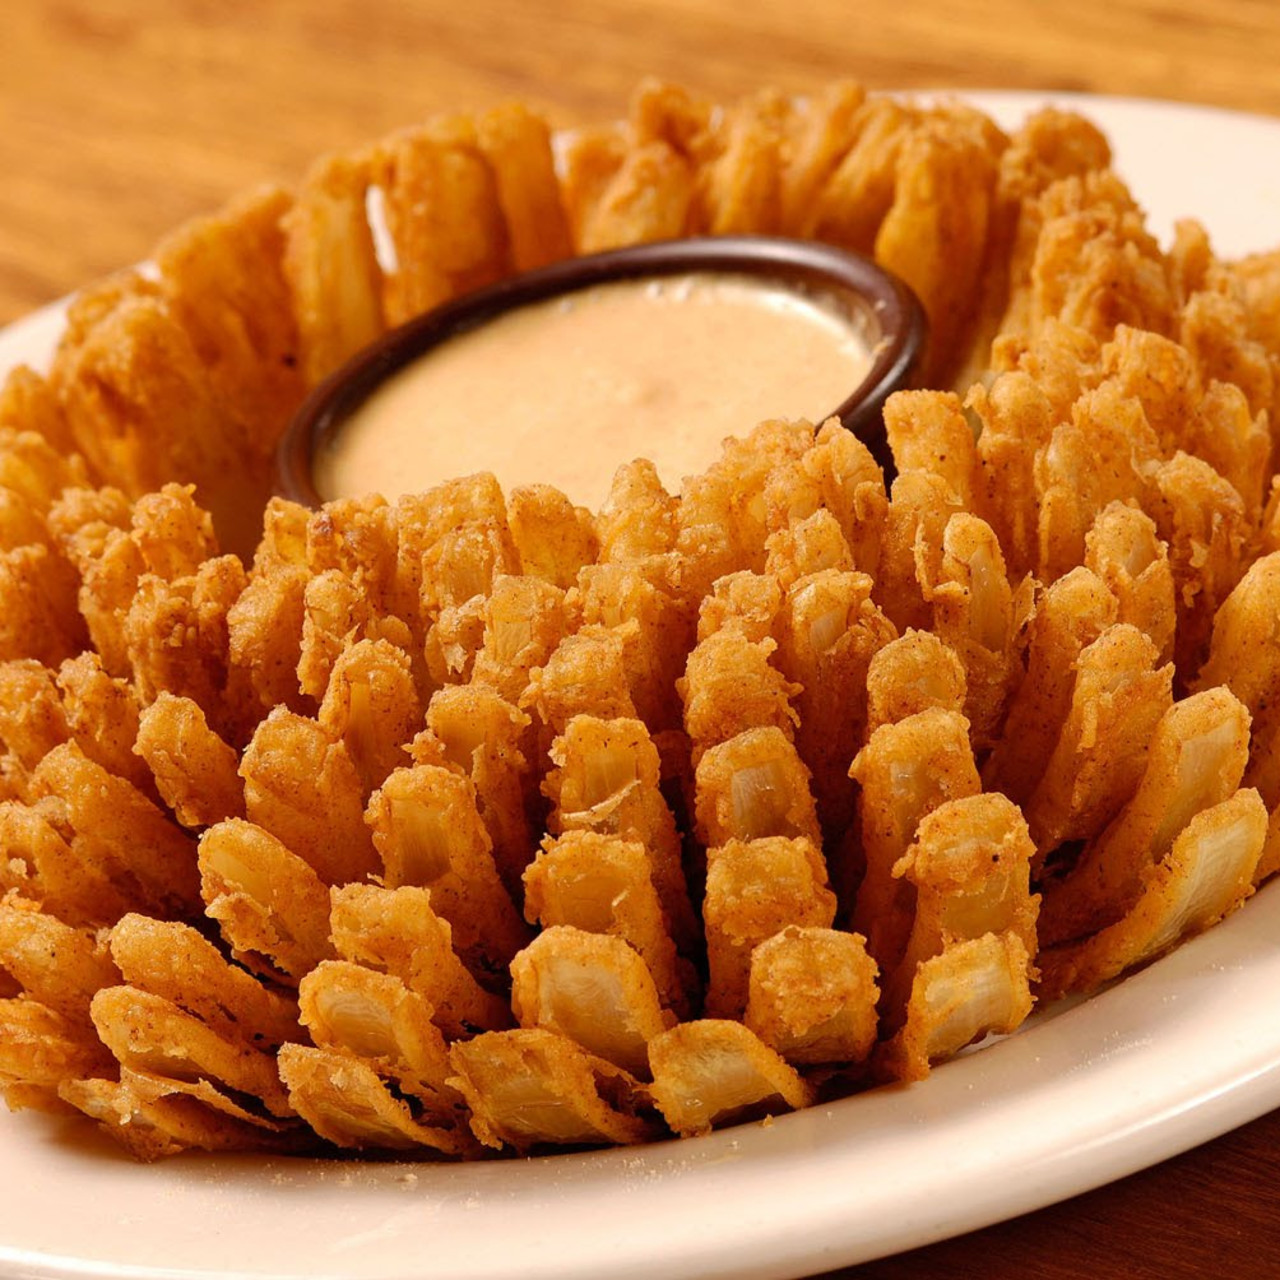 Blooming Onion